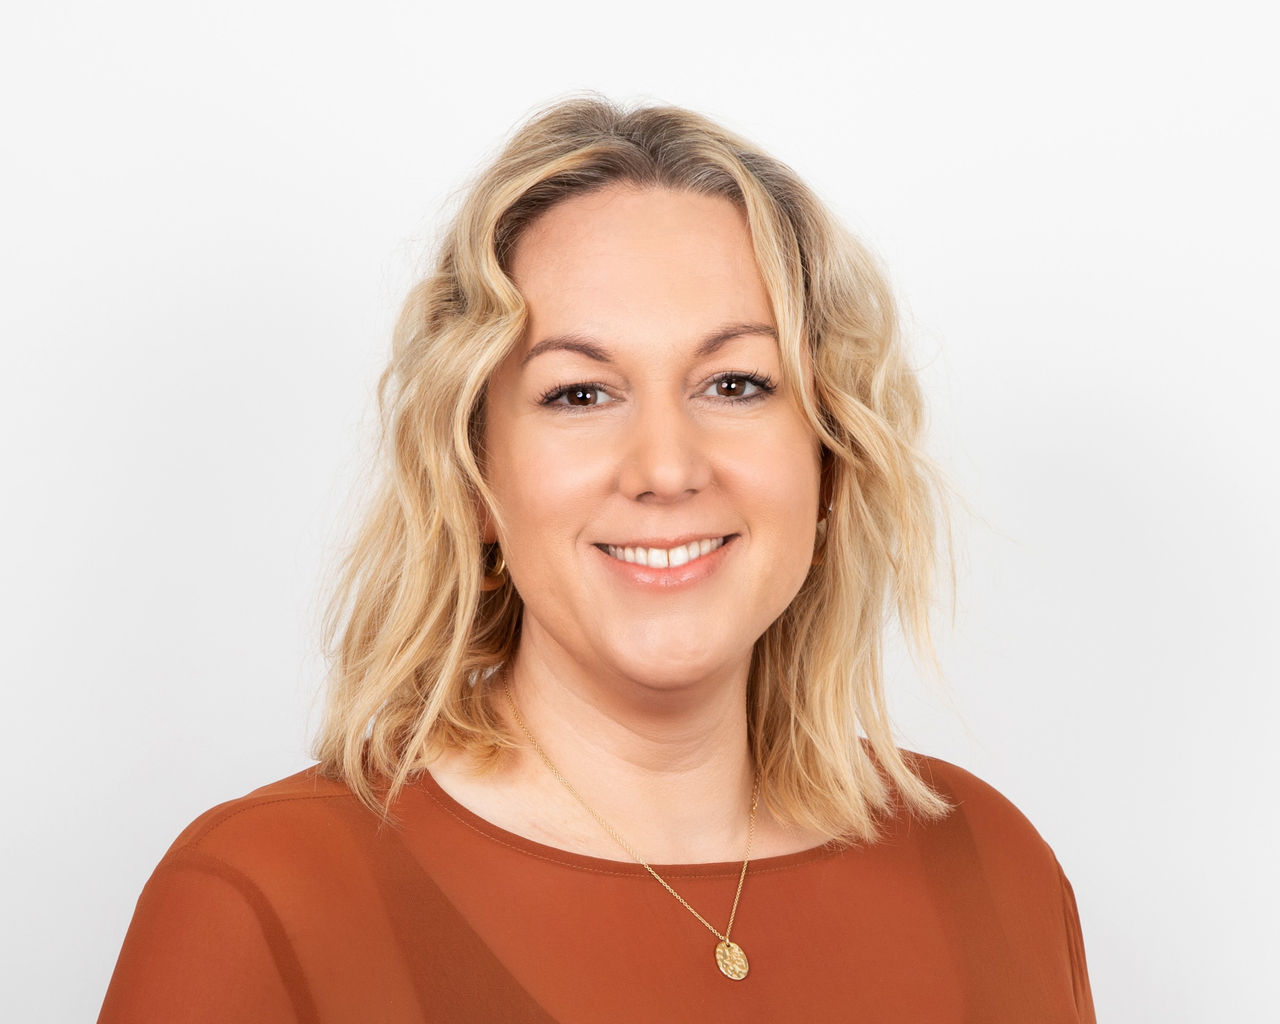 Profile Picture of Nicola Johnston, General Manager Growth